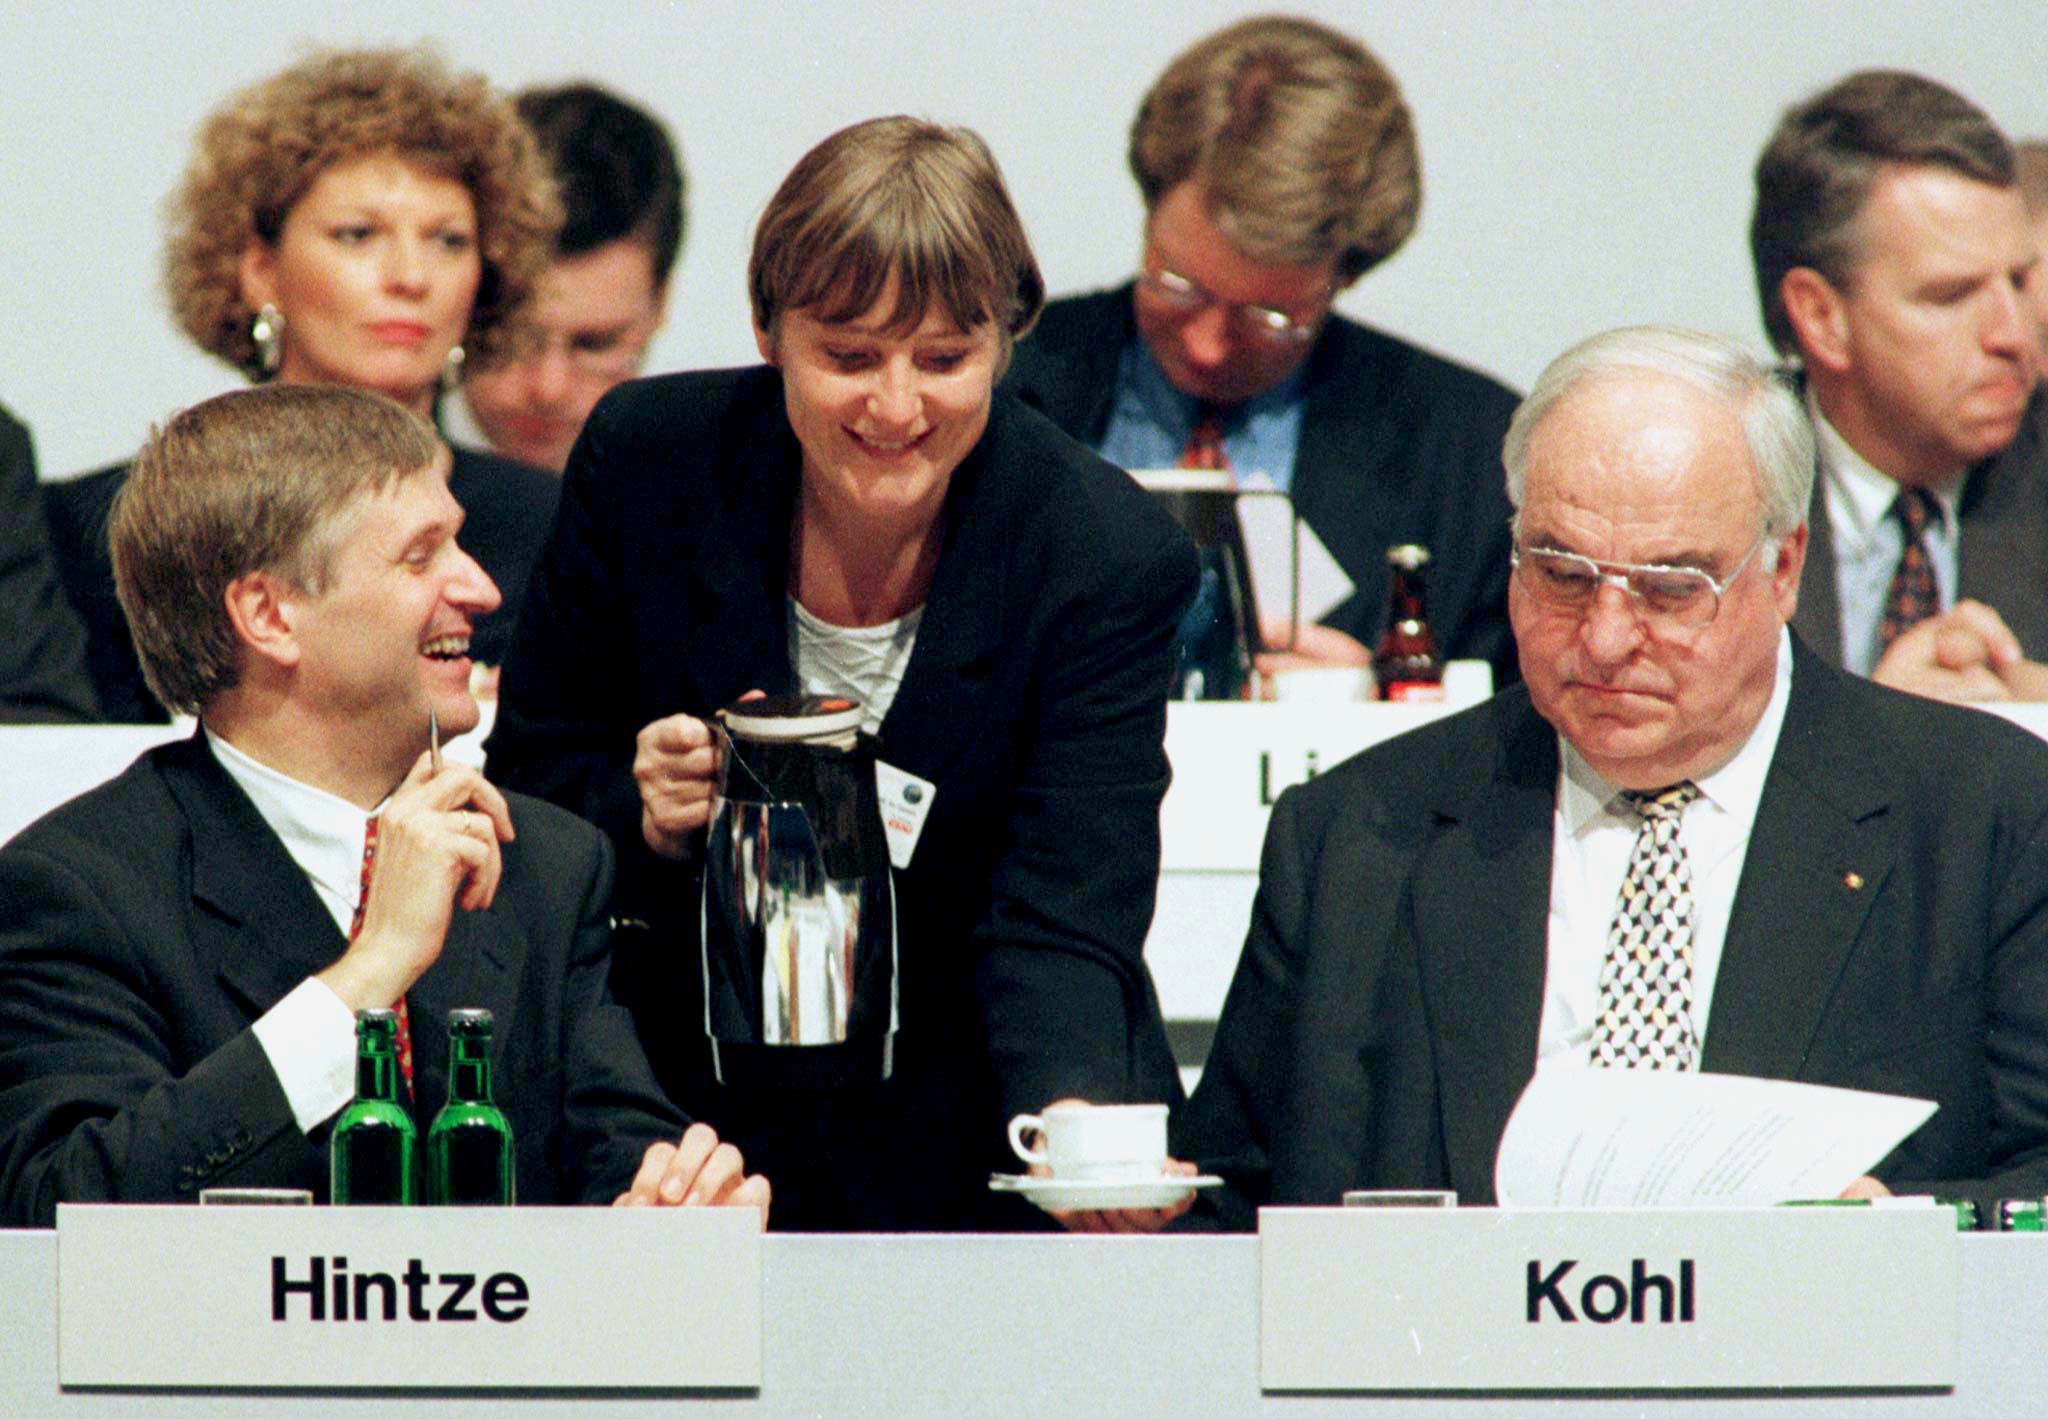 Environmental Minister Angela Merkel (C) serves some coffee as German Chancellor and CDU leader Helmut Kohl (R) and party secretary Peter Hintze (L) look on at the annual CDU (Christian Democratic Union) party congress, October 21.